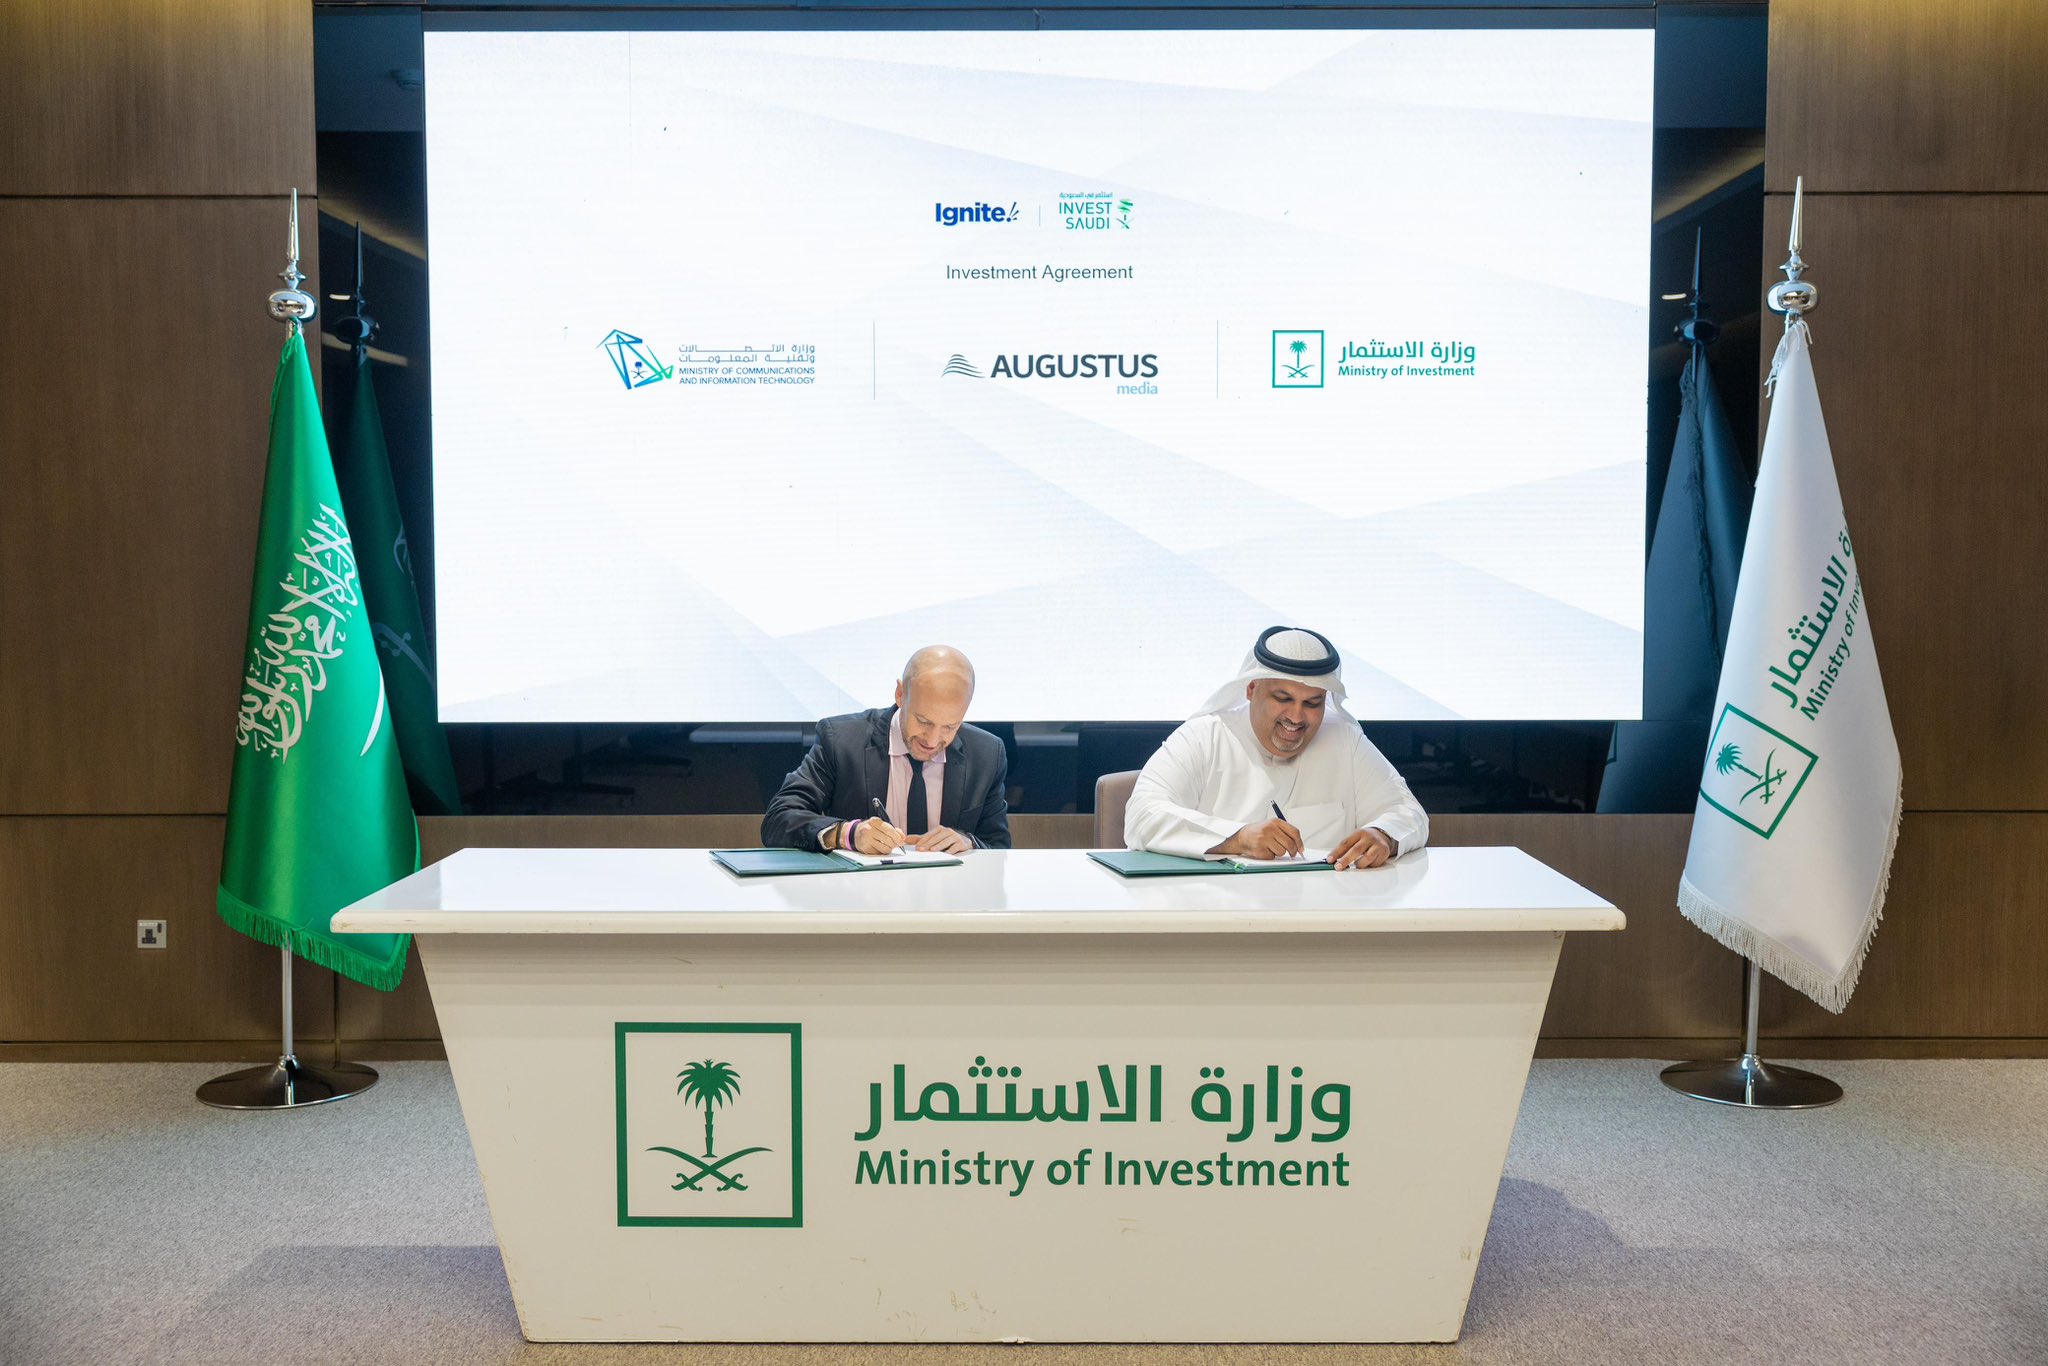 Augustus Media signing the agreement to join the Ignite program to accelerate Saudi media industry